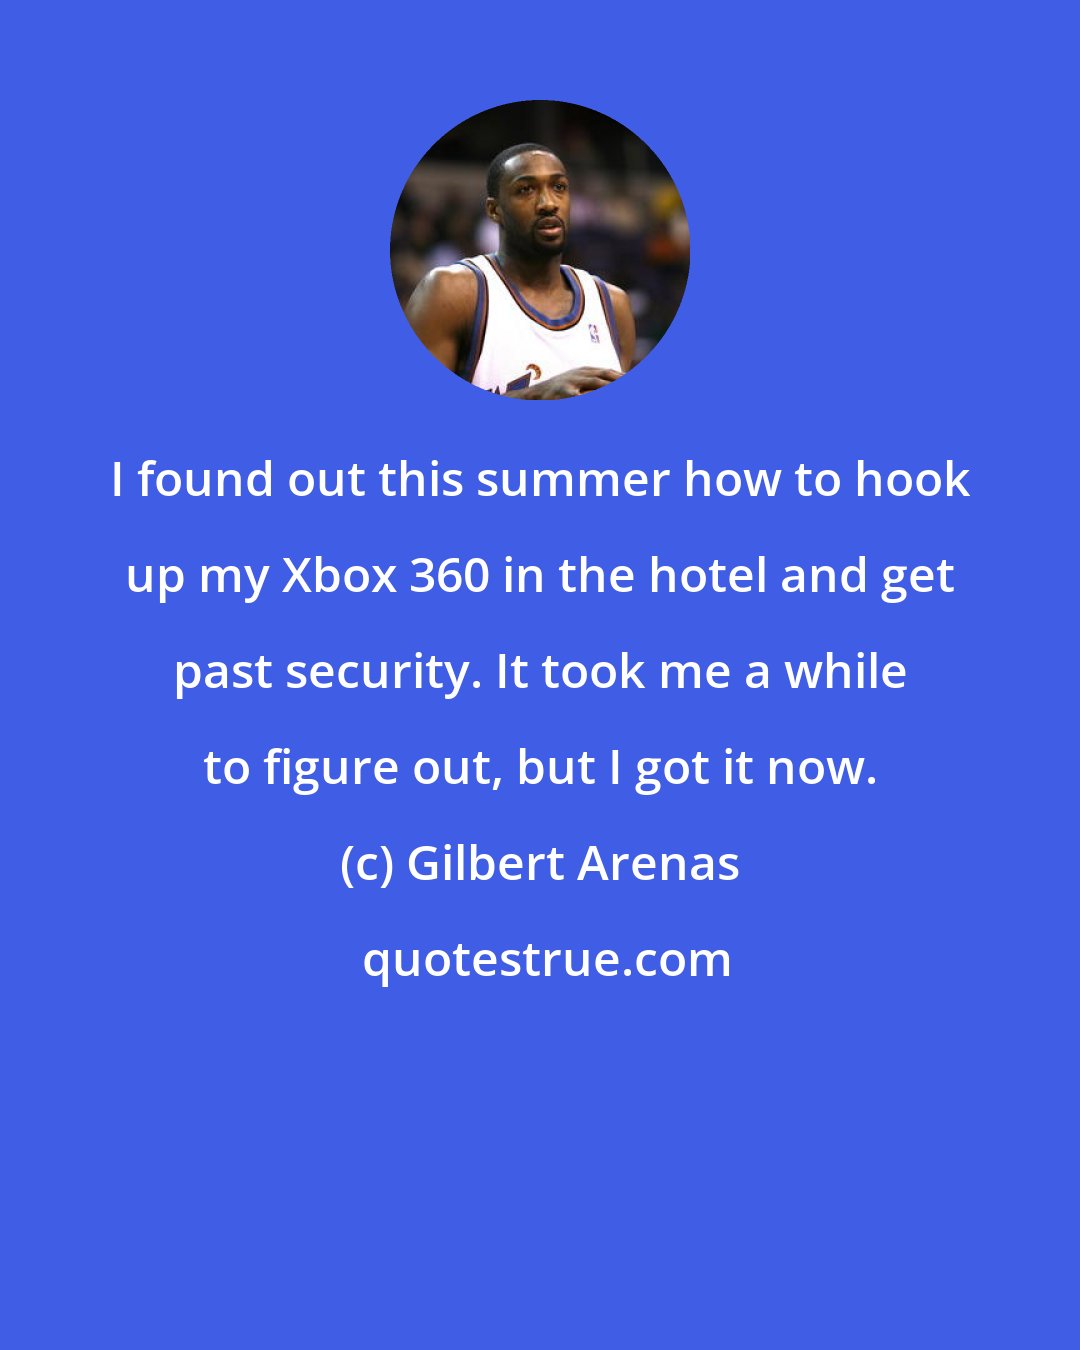 Gilbert Arenas: I found out this summer how to hook up my Xbox 360 in the hotel and get past security. It took me a while to figure out, but I got it now.